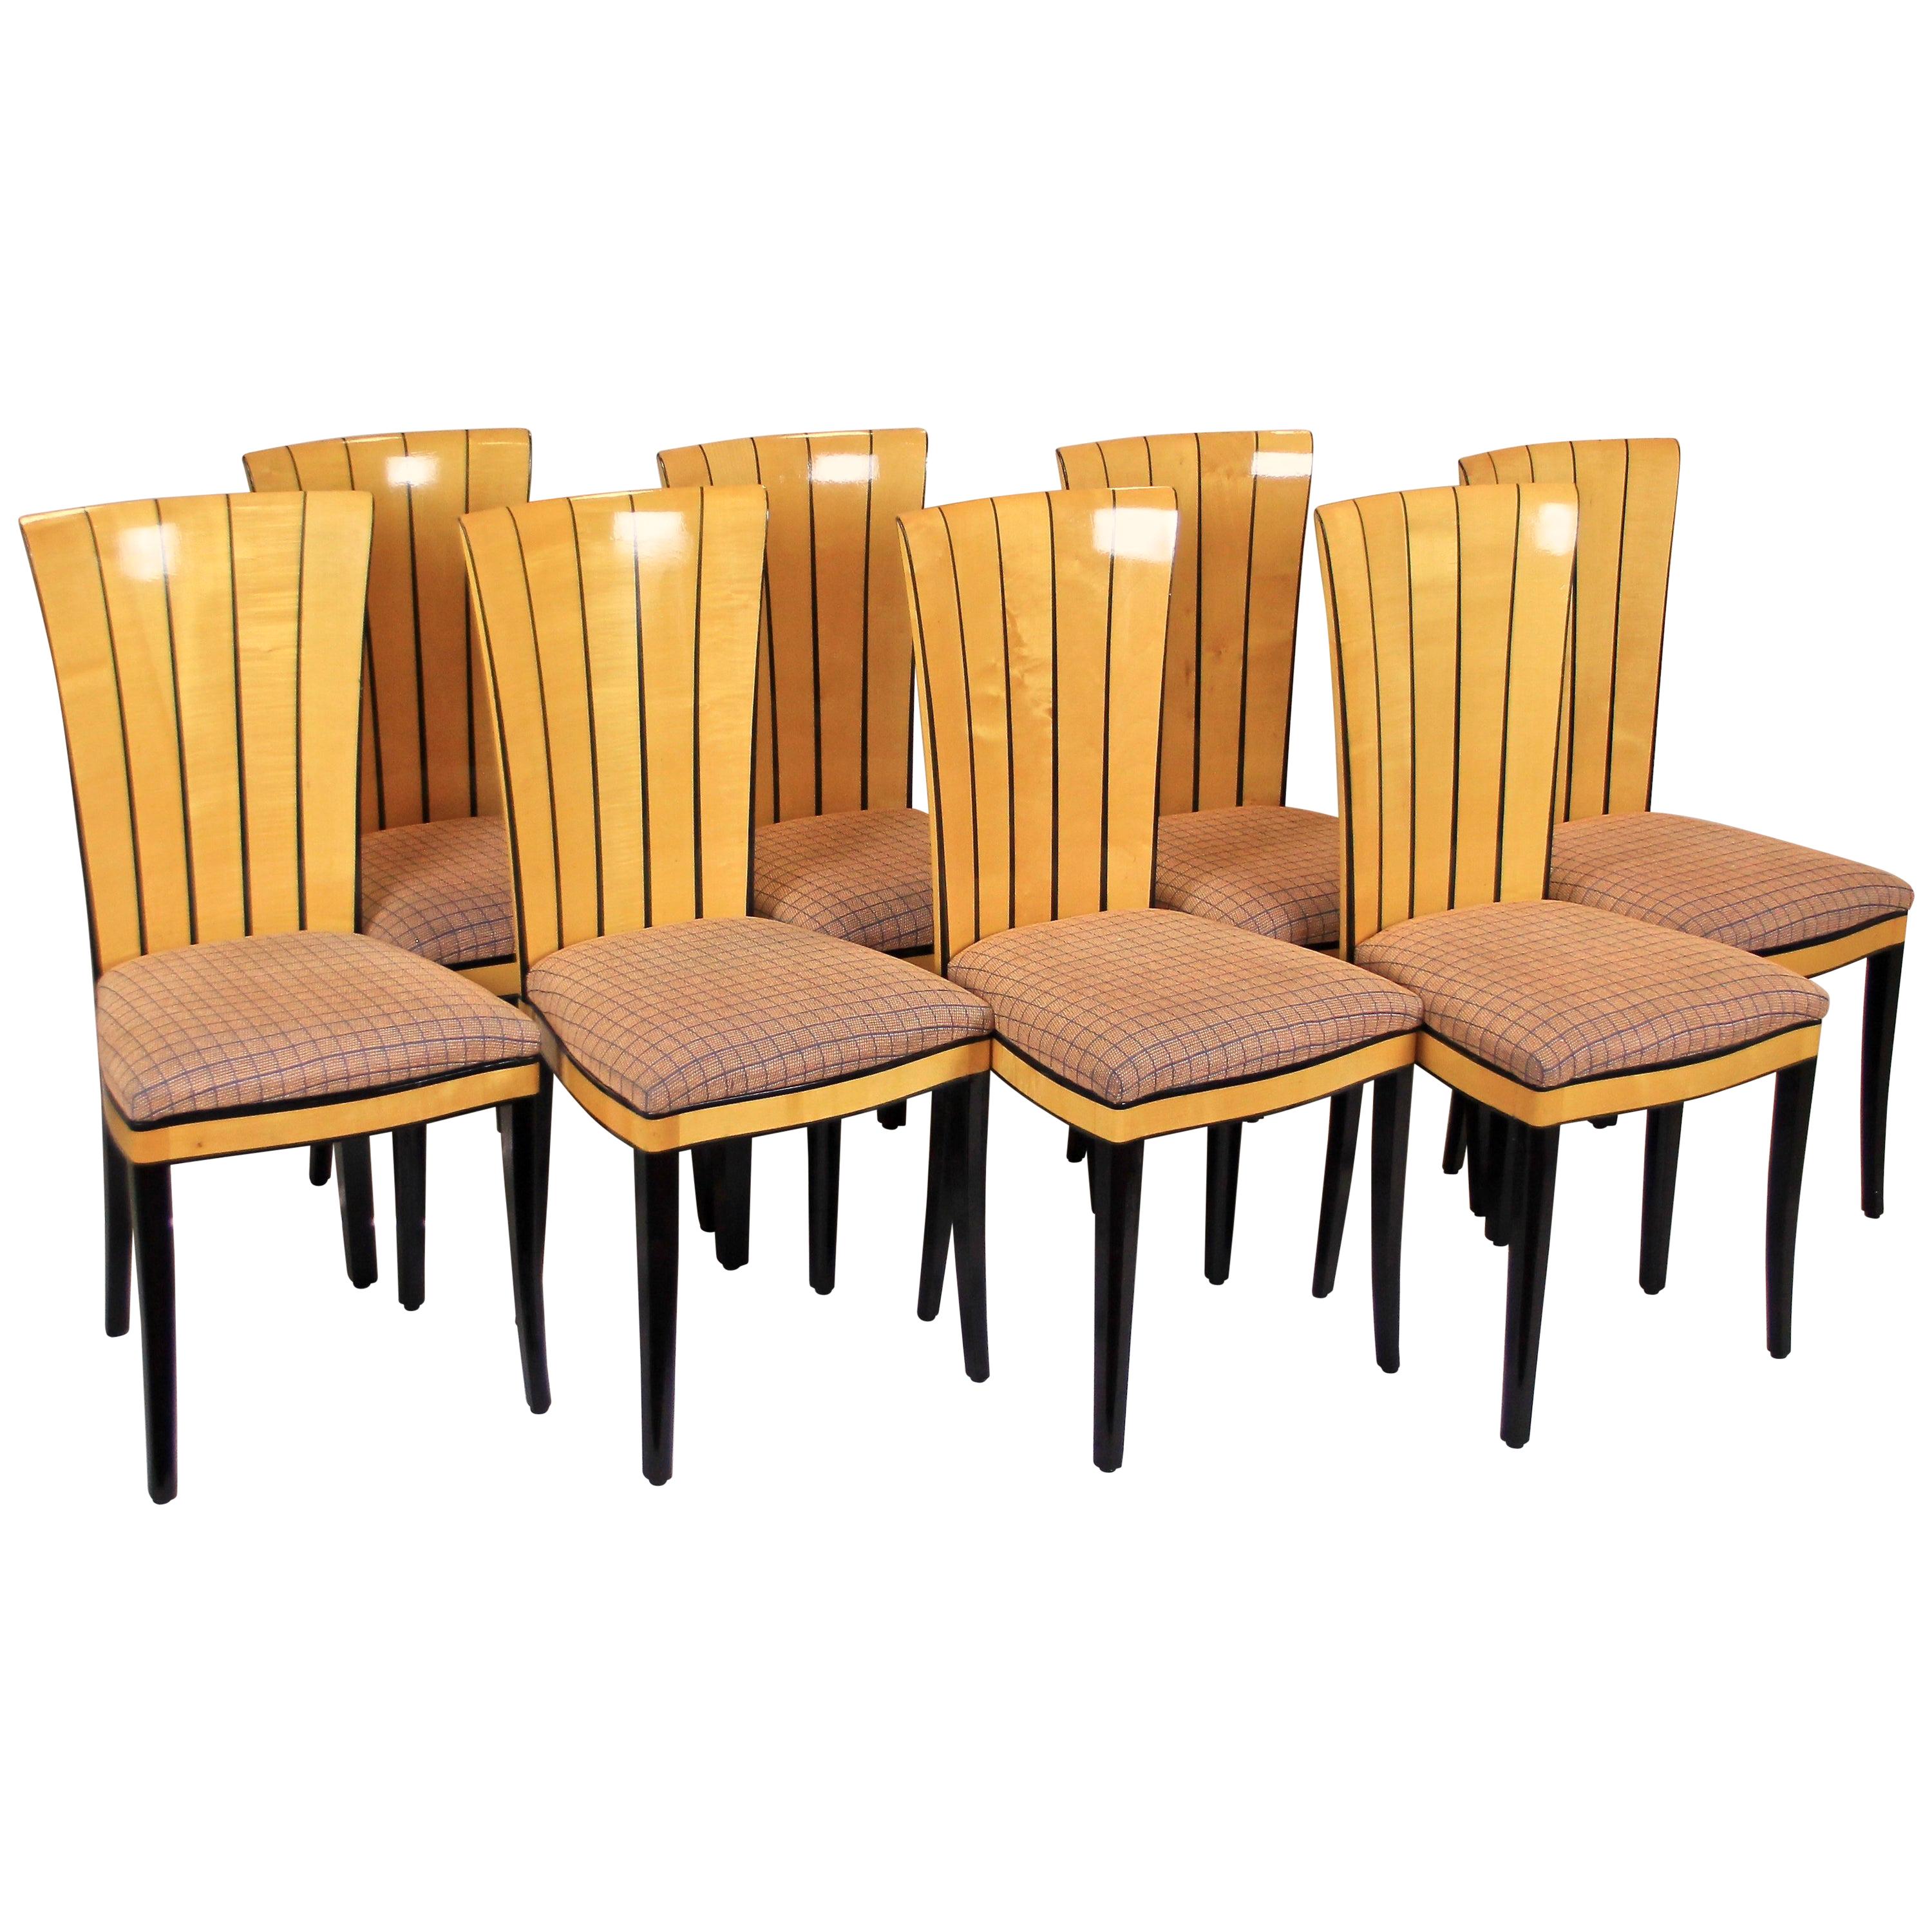 Set of Six Dining Room Chairs Saarinen House by Adelta, Finland, circa 1983